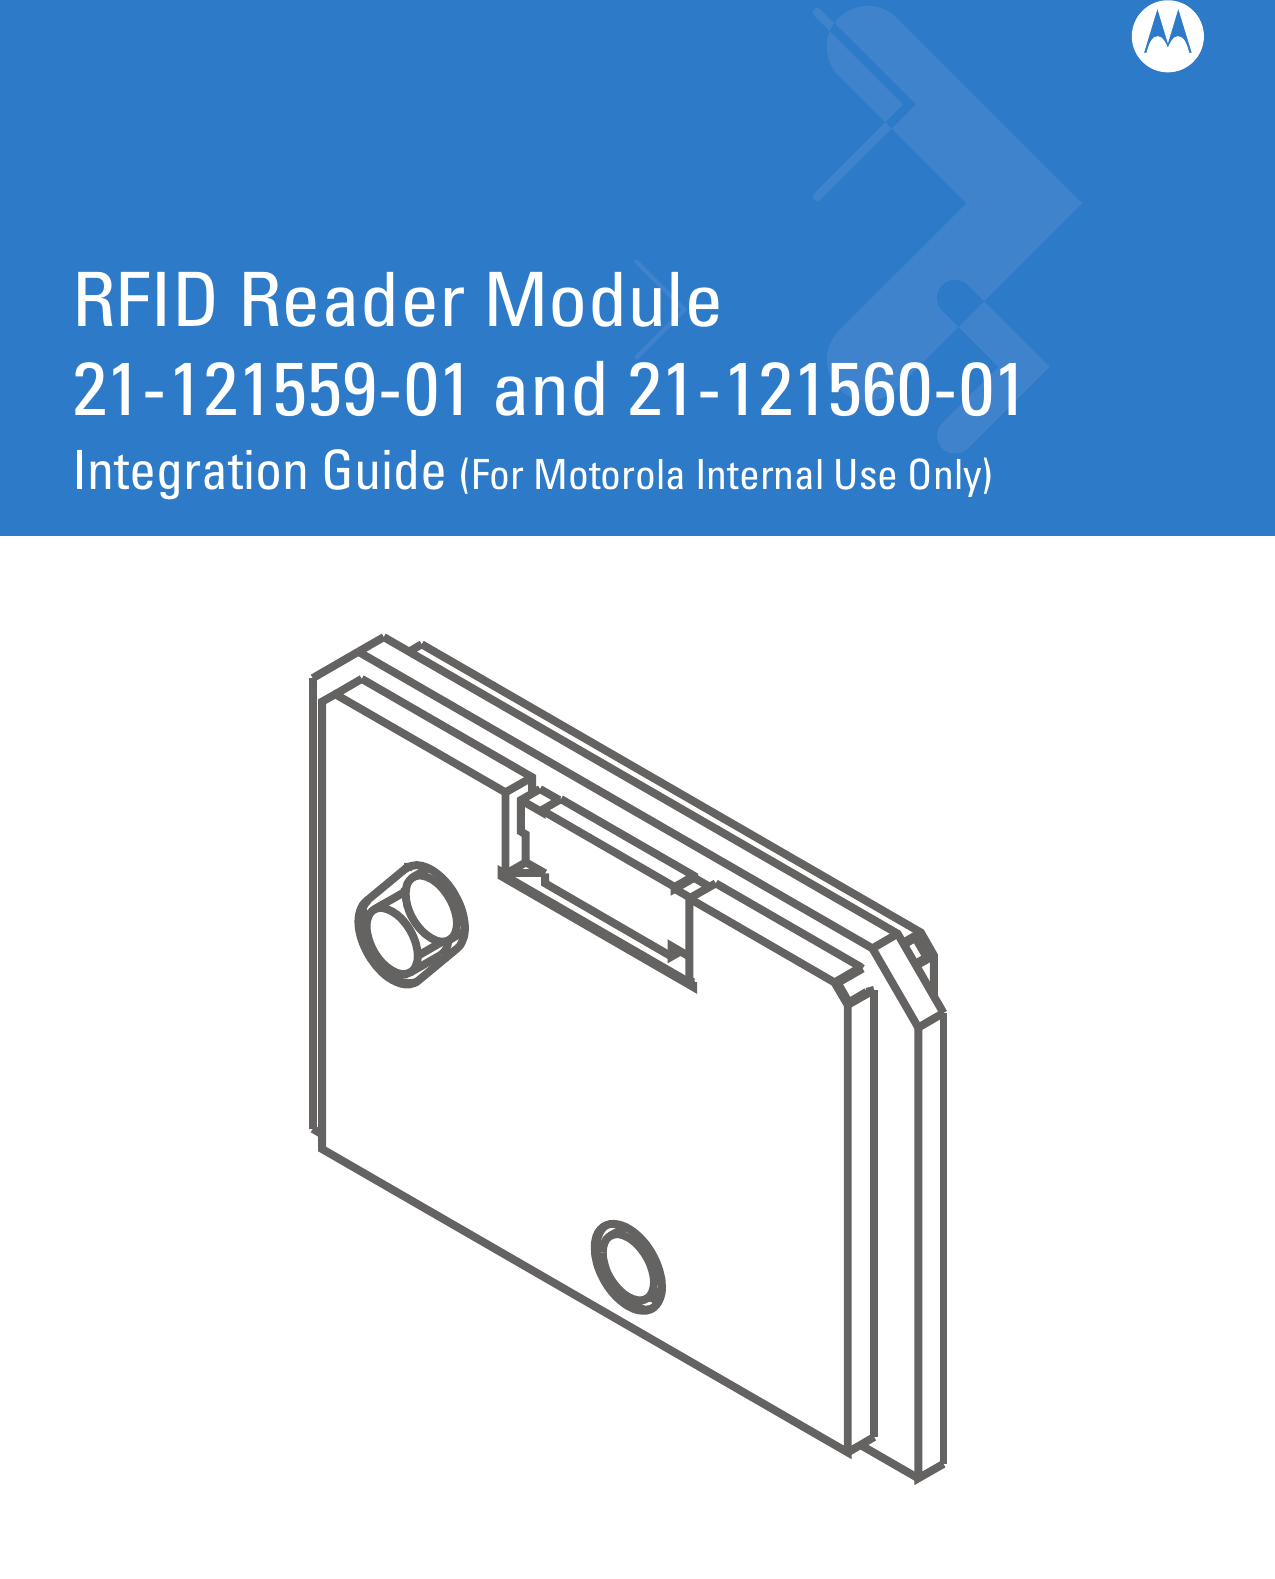 RFID Reader Module 21-121559-01 and 21-121560-01Integration Guide (For Motorola Internal Use Only)